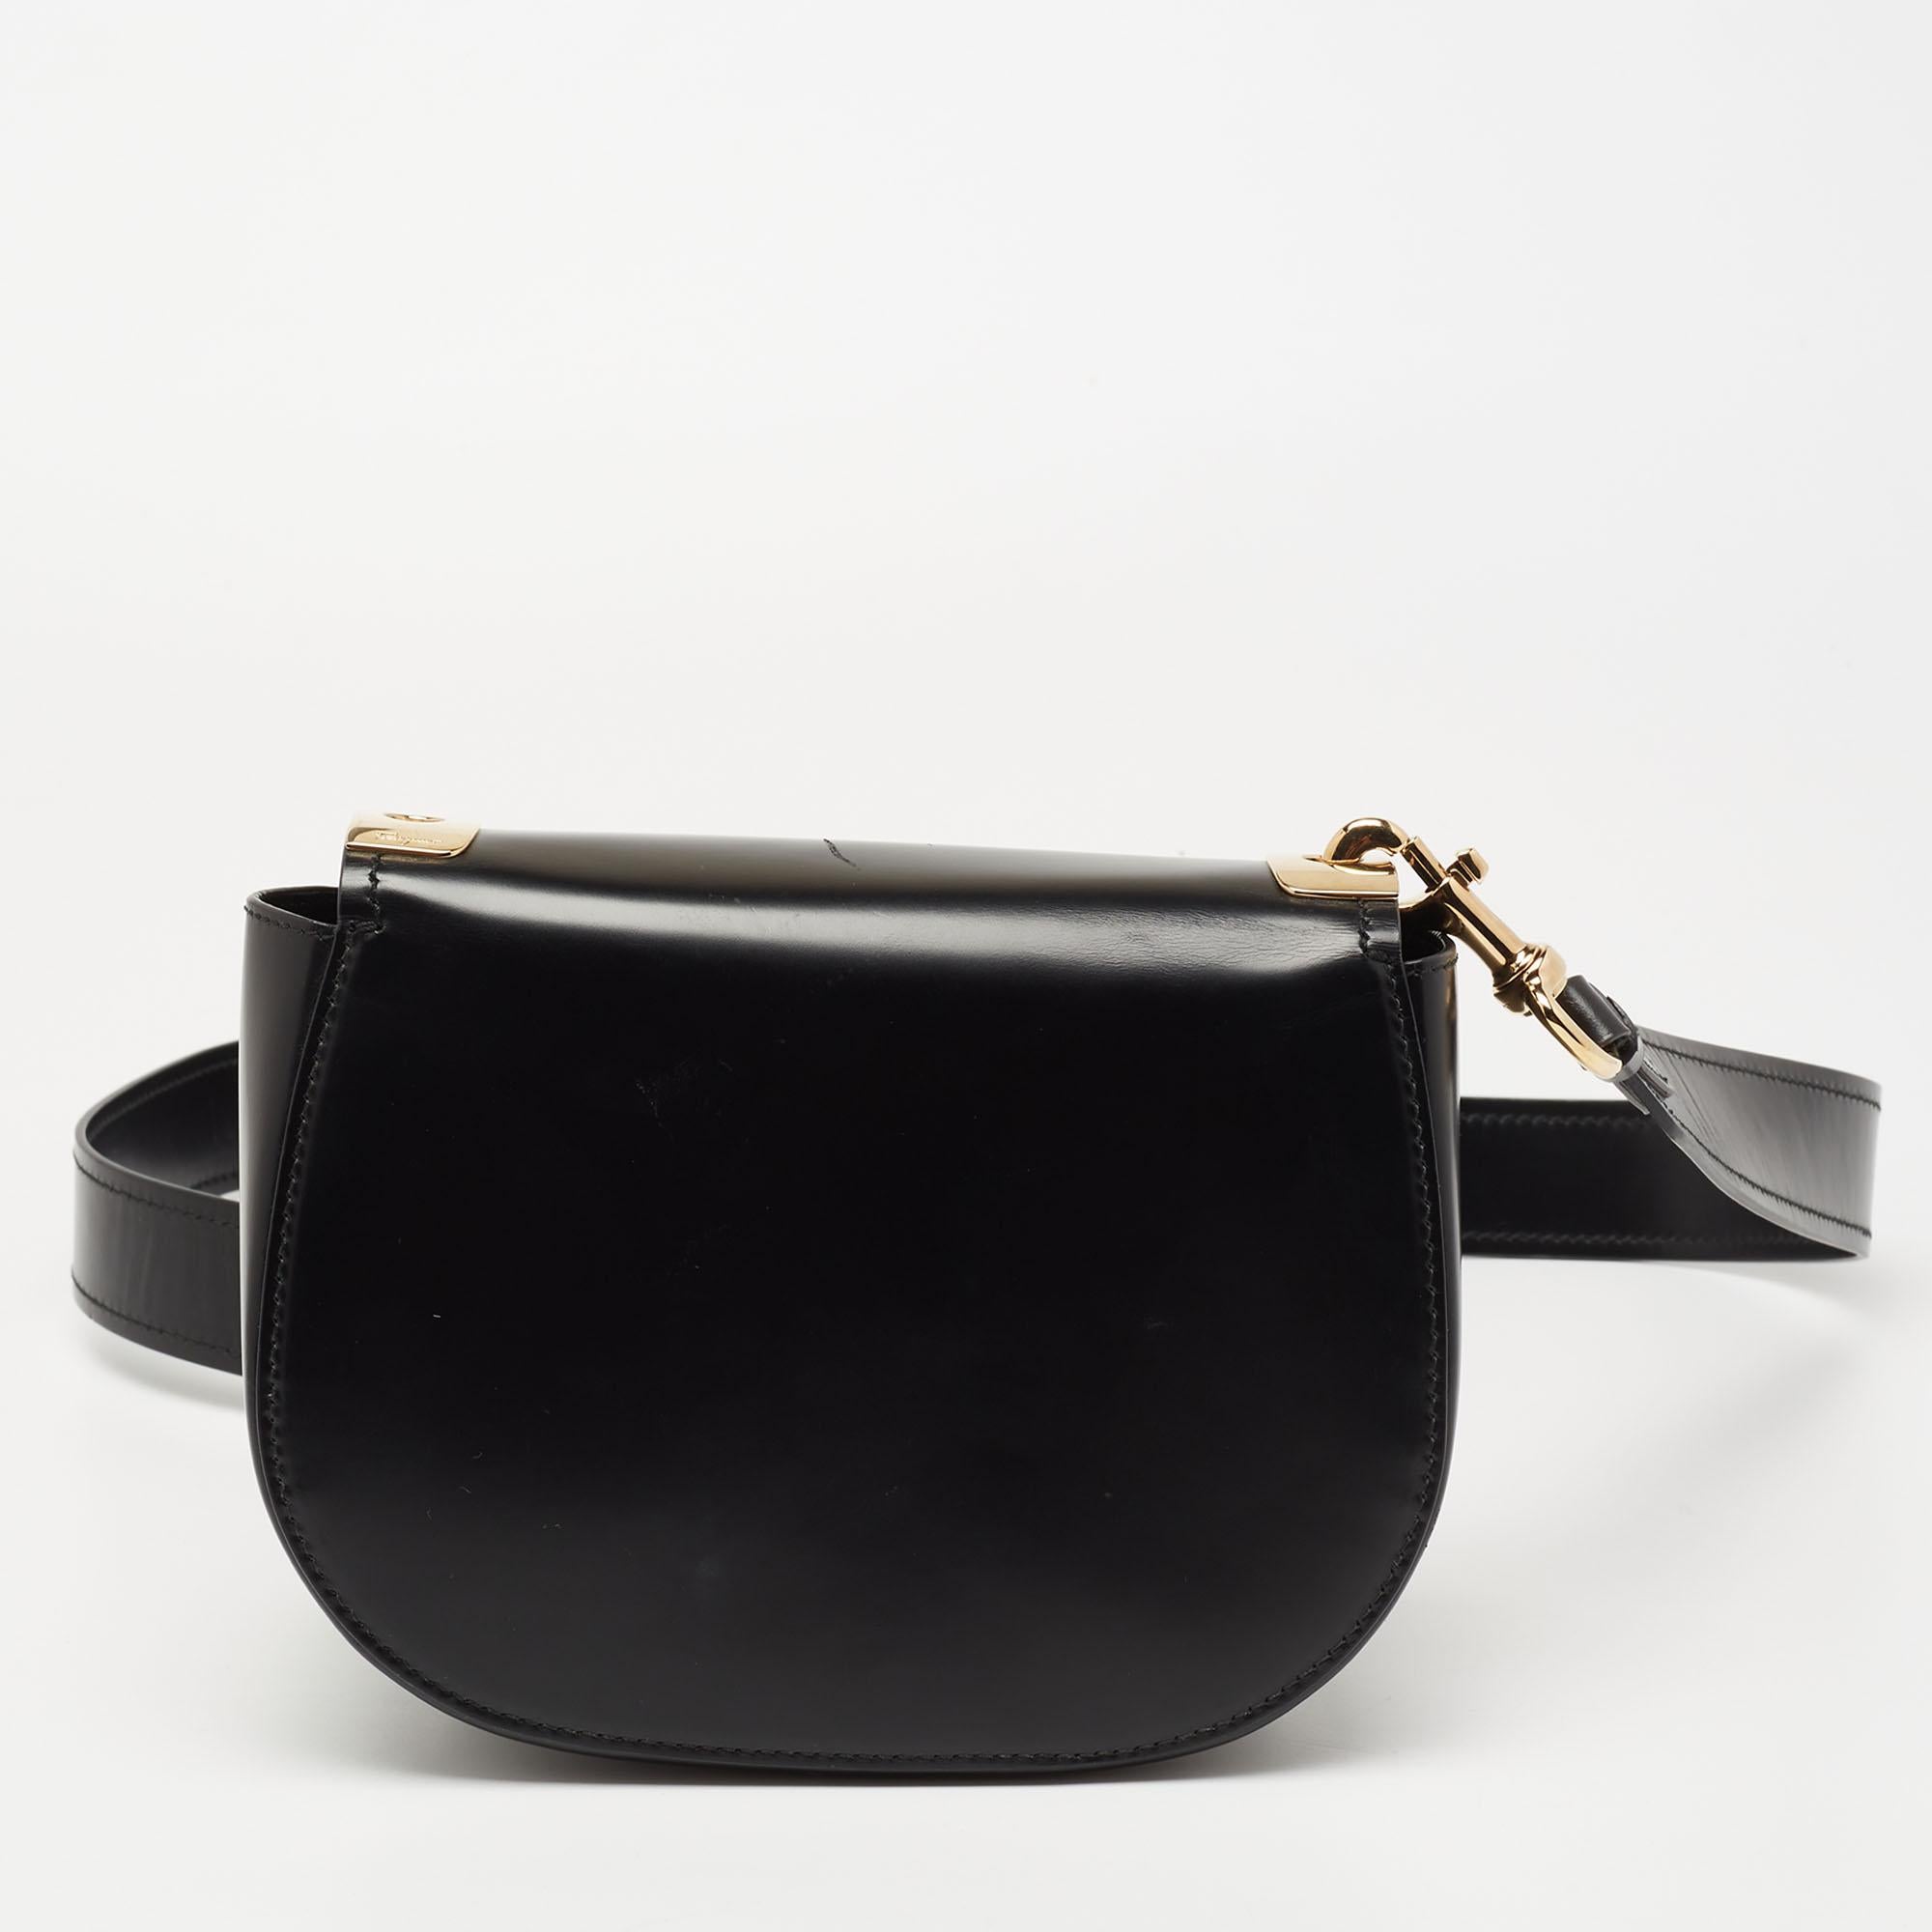 This shoulder bag from the House of Salvatore Ferragamo is both elegant and fashionable. Crafted from black leather, this bag features a shoulder strap, gold-tone hardware, and a leather-lined interior. A Vara Bow accent is placed on the front. Make